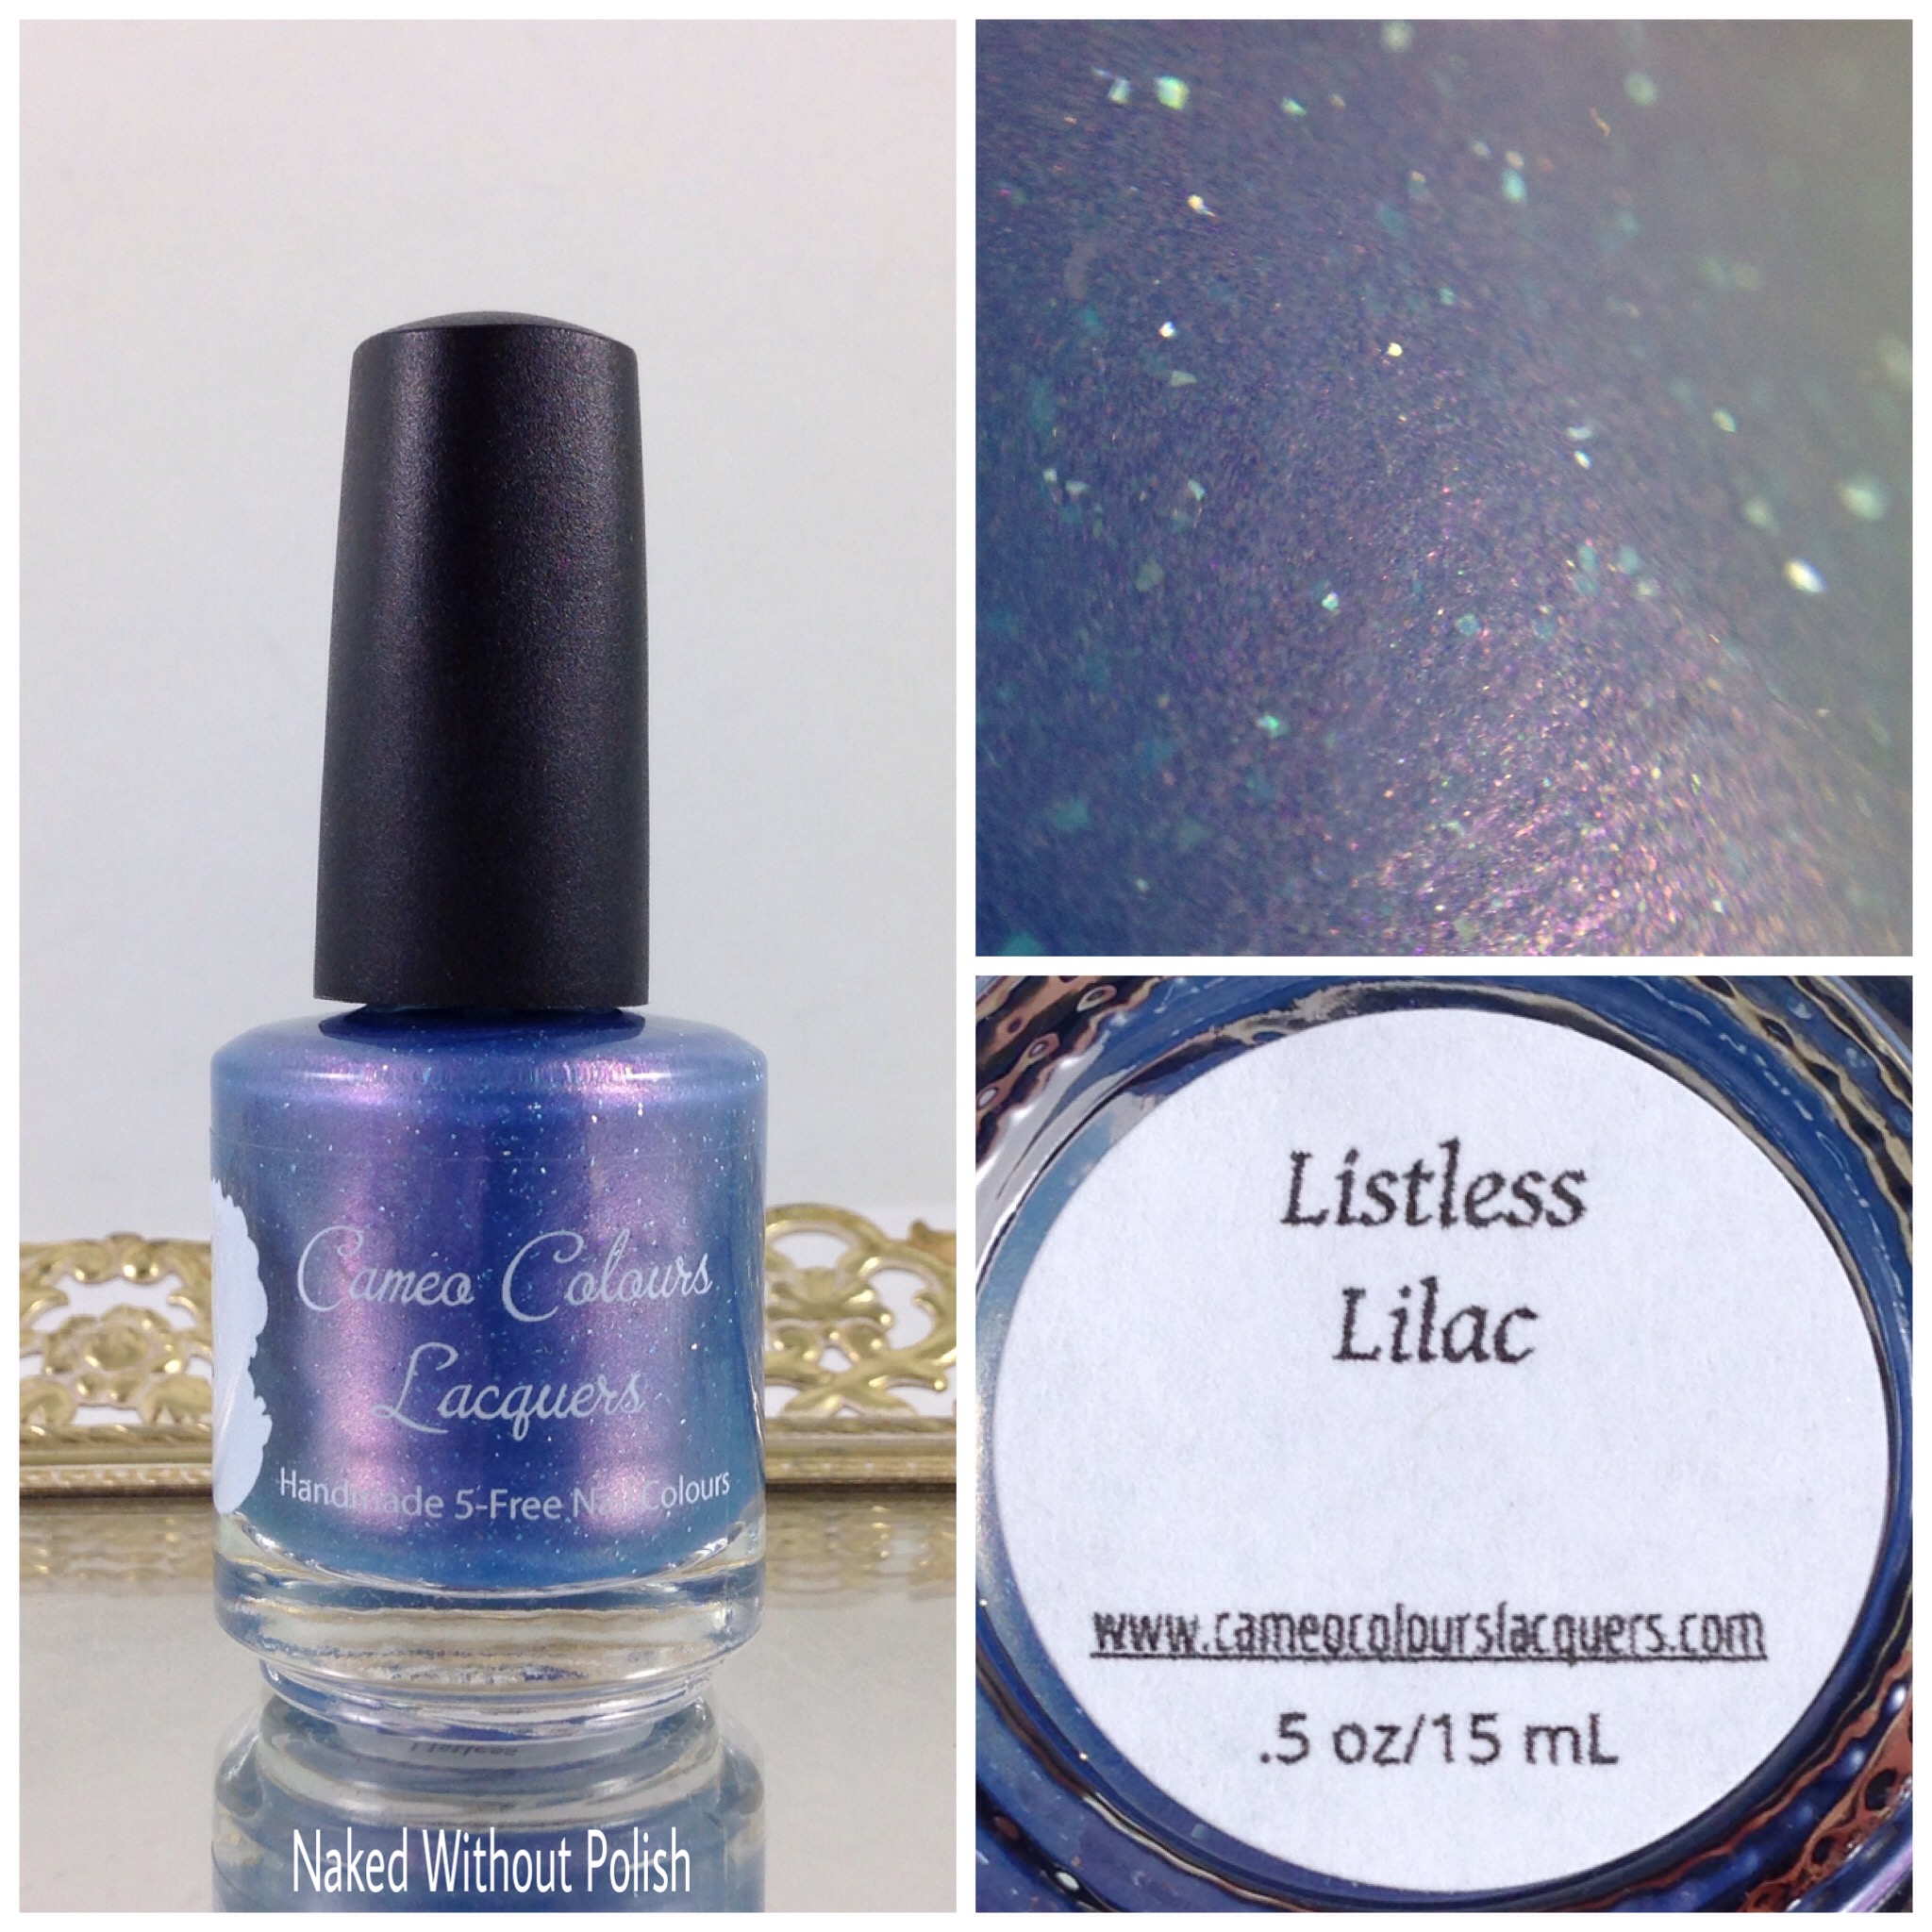 Cameo-Colours-Lacquers-Listless-Lilac-1